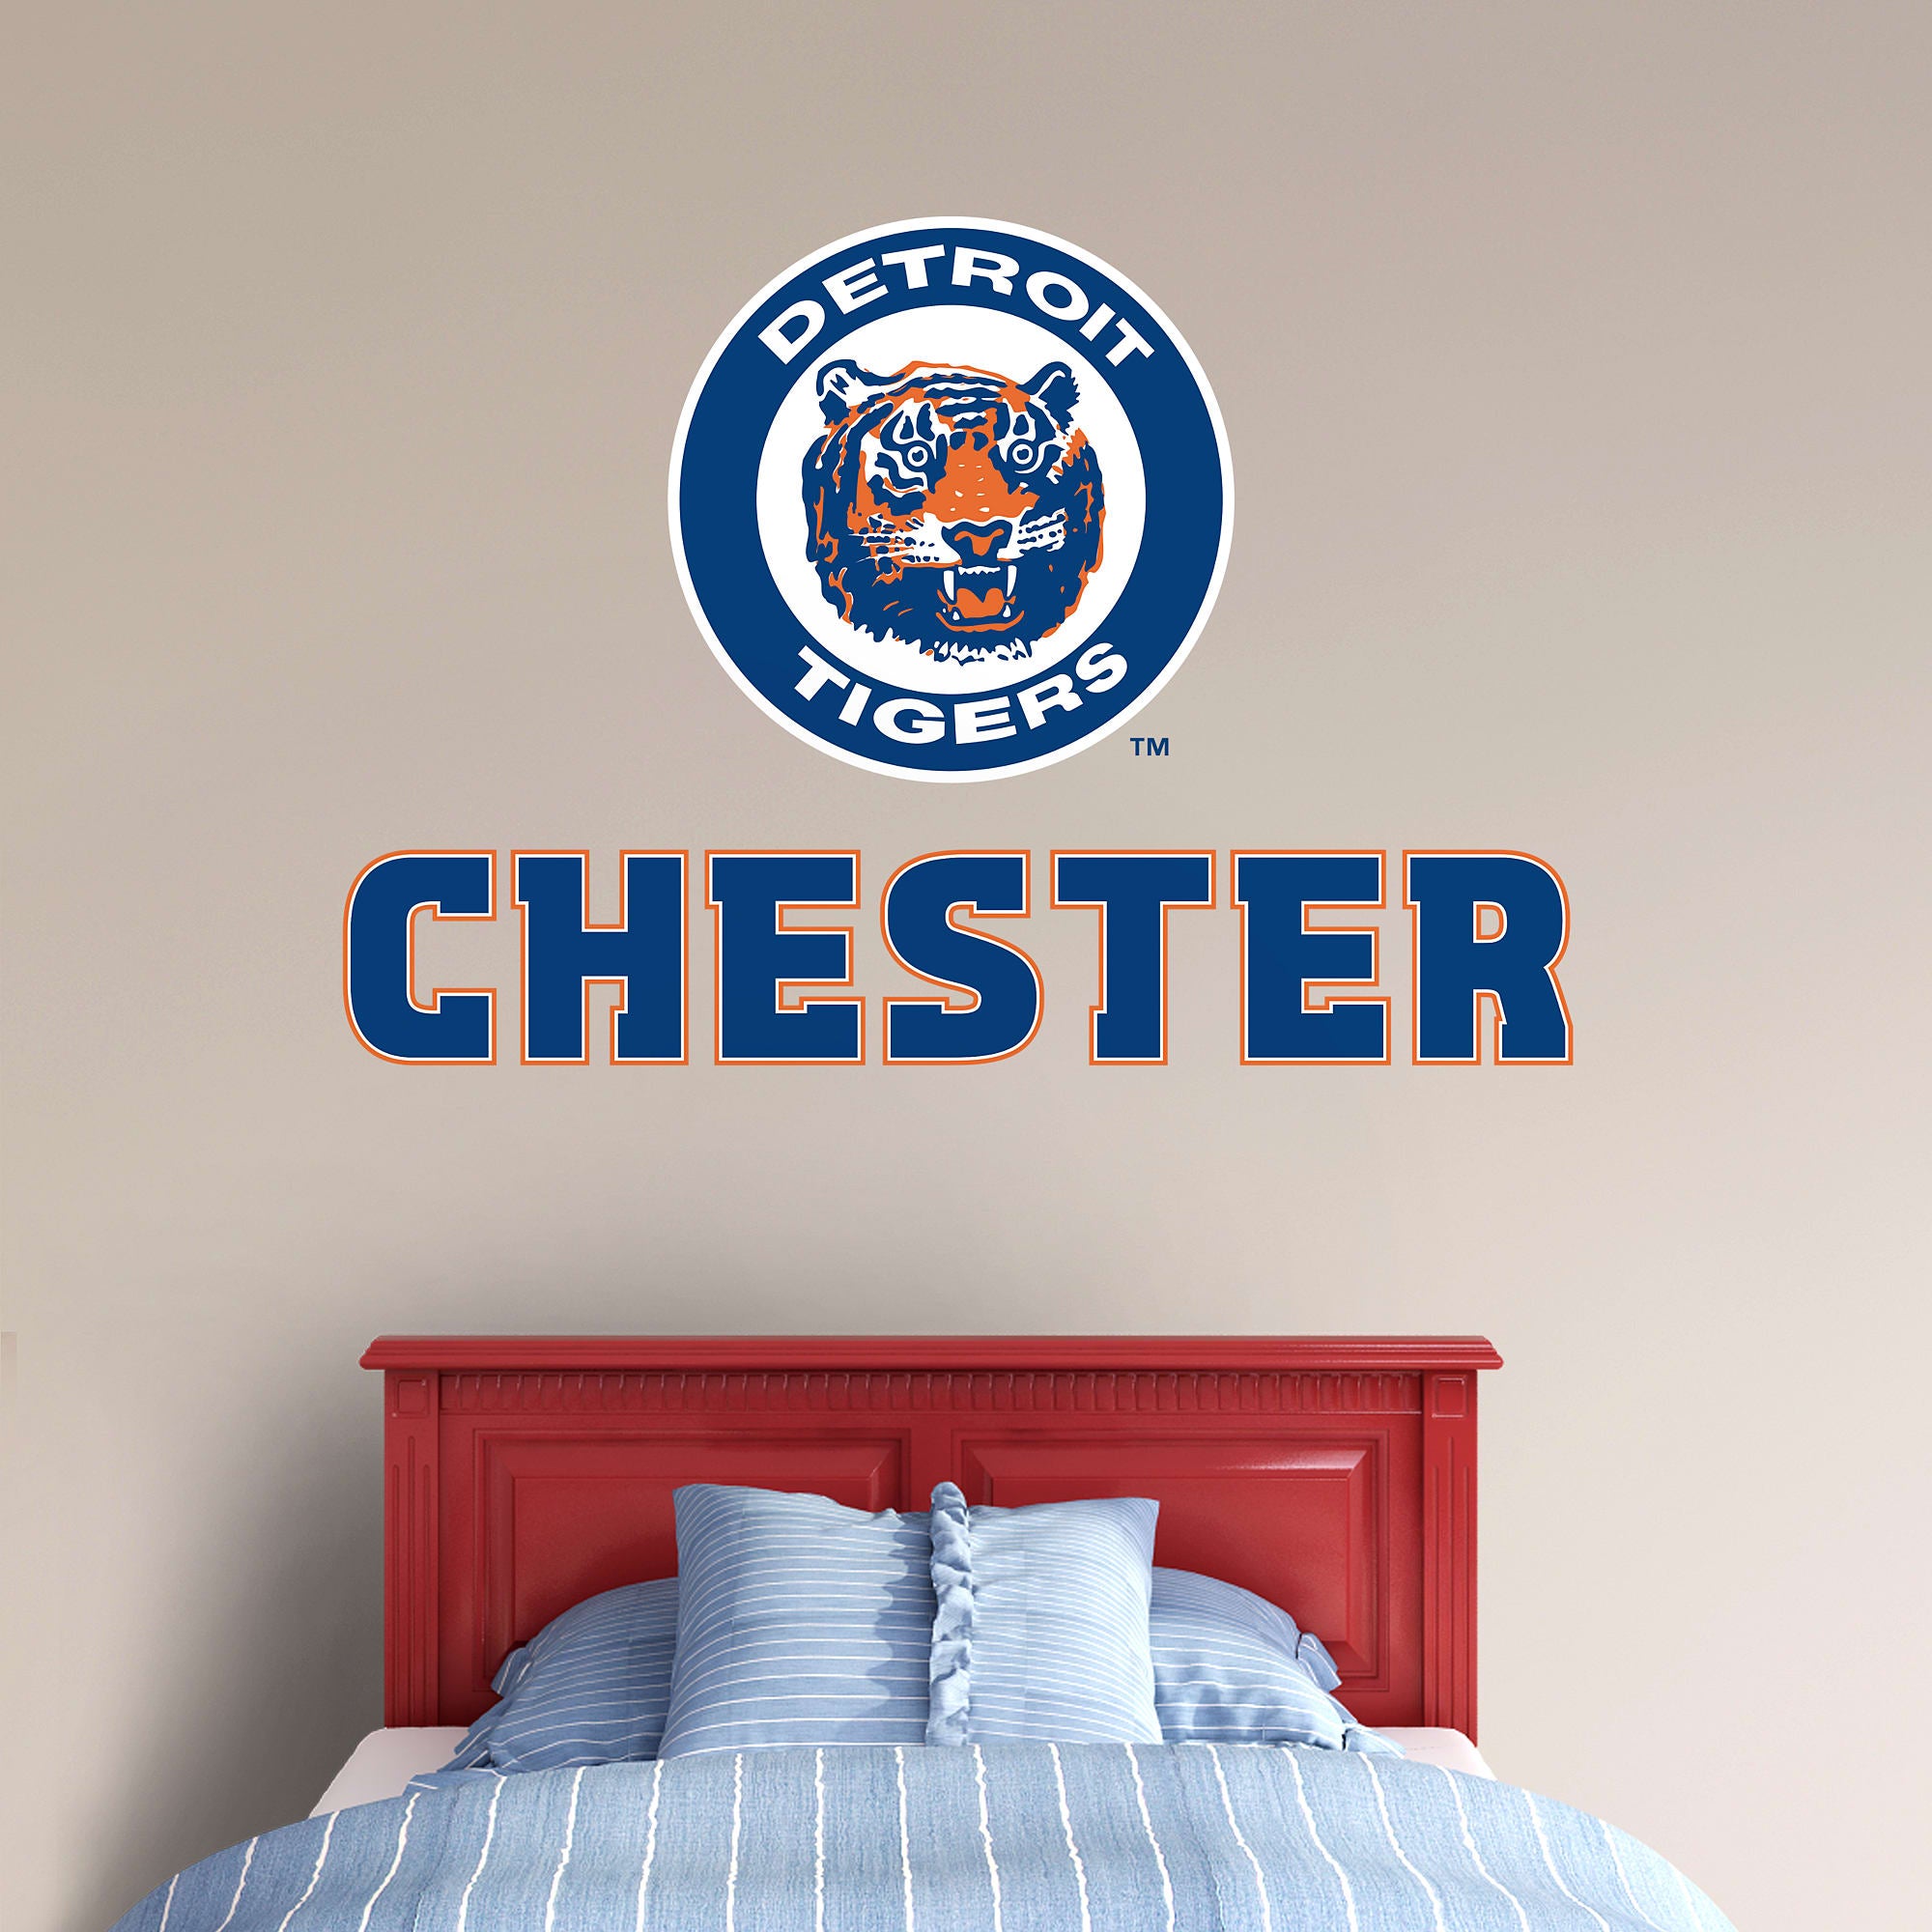 Detroit Tigers: Classic Stacked Personalized Name - Officially Licensed MLB Transfer Decal in Blue (52"W x 39.5"H) by Fathead |